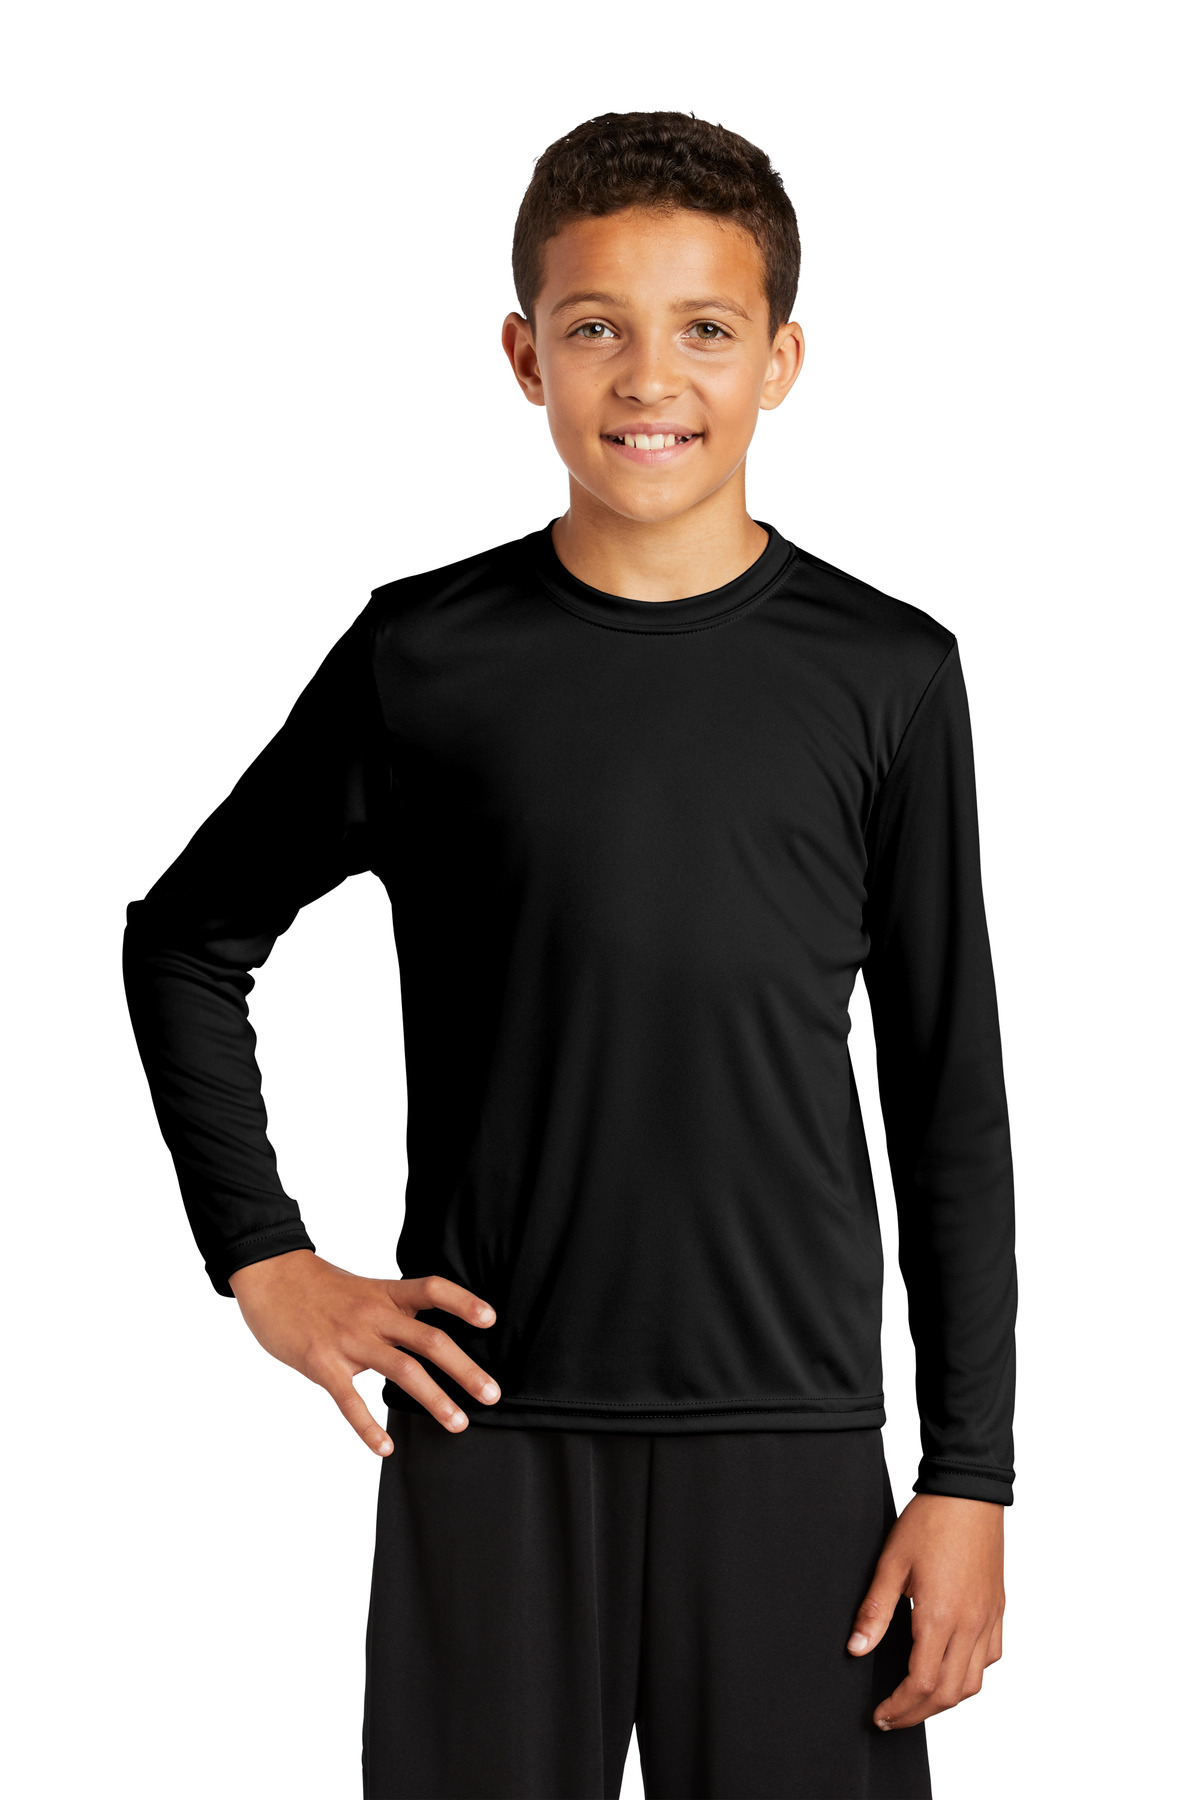 Sport-Tek Activewear Youth T-Shirts for Hospitality ® Youth Long Sleeve PosiCharge® Competitor Tee.-Sport-Tek